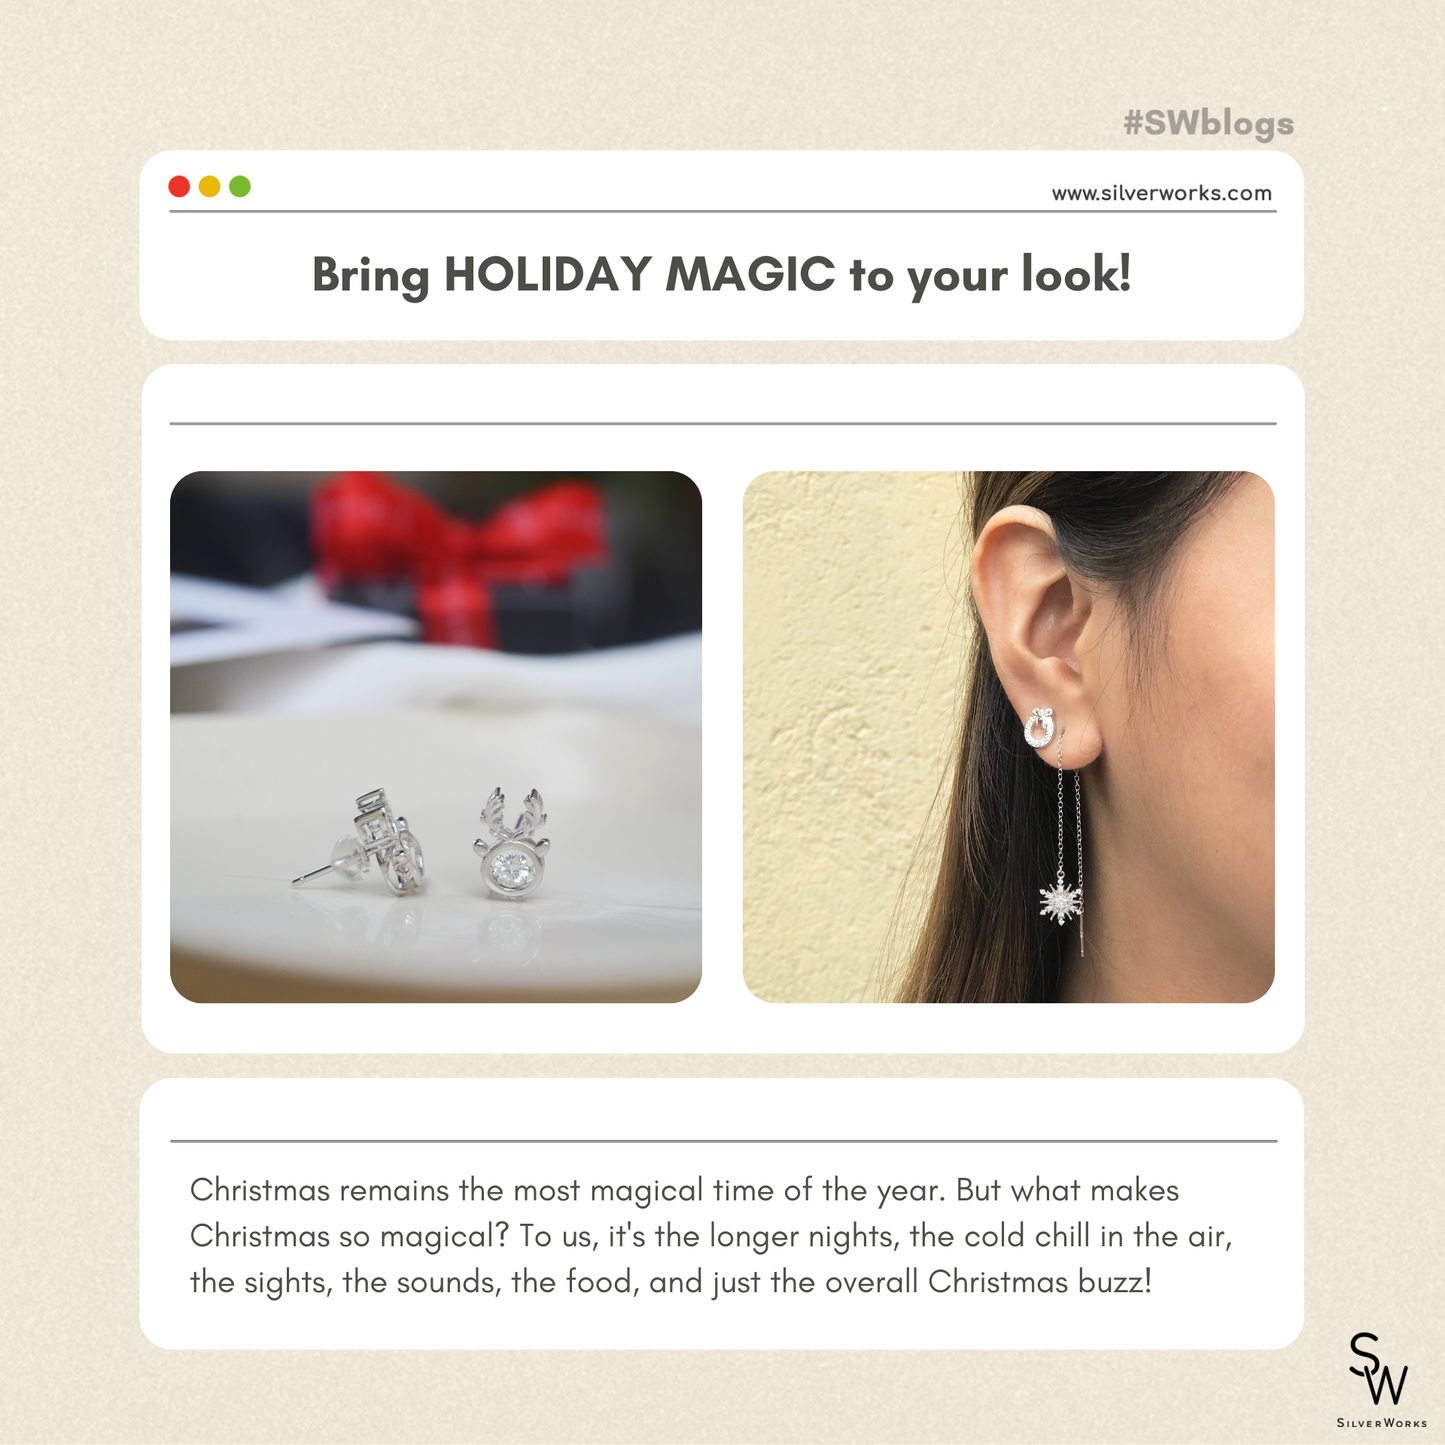 BRING HOLIDAY MAGIC TO YOUR LOOK